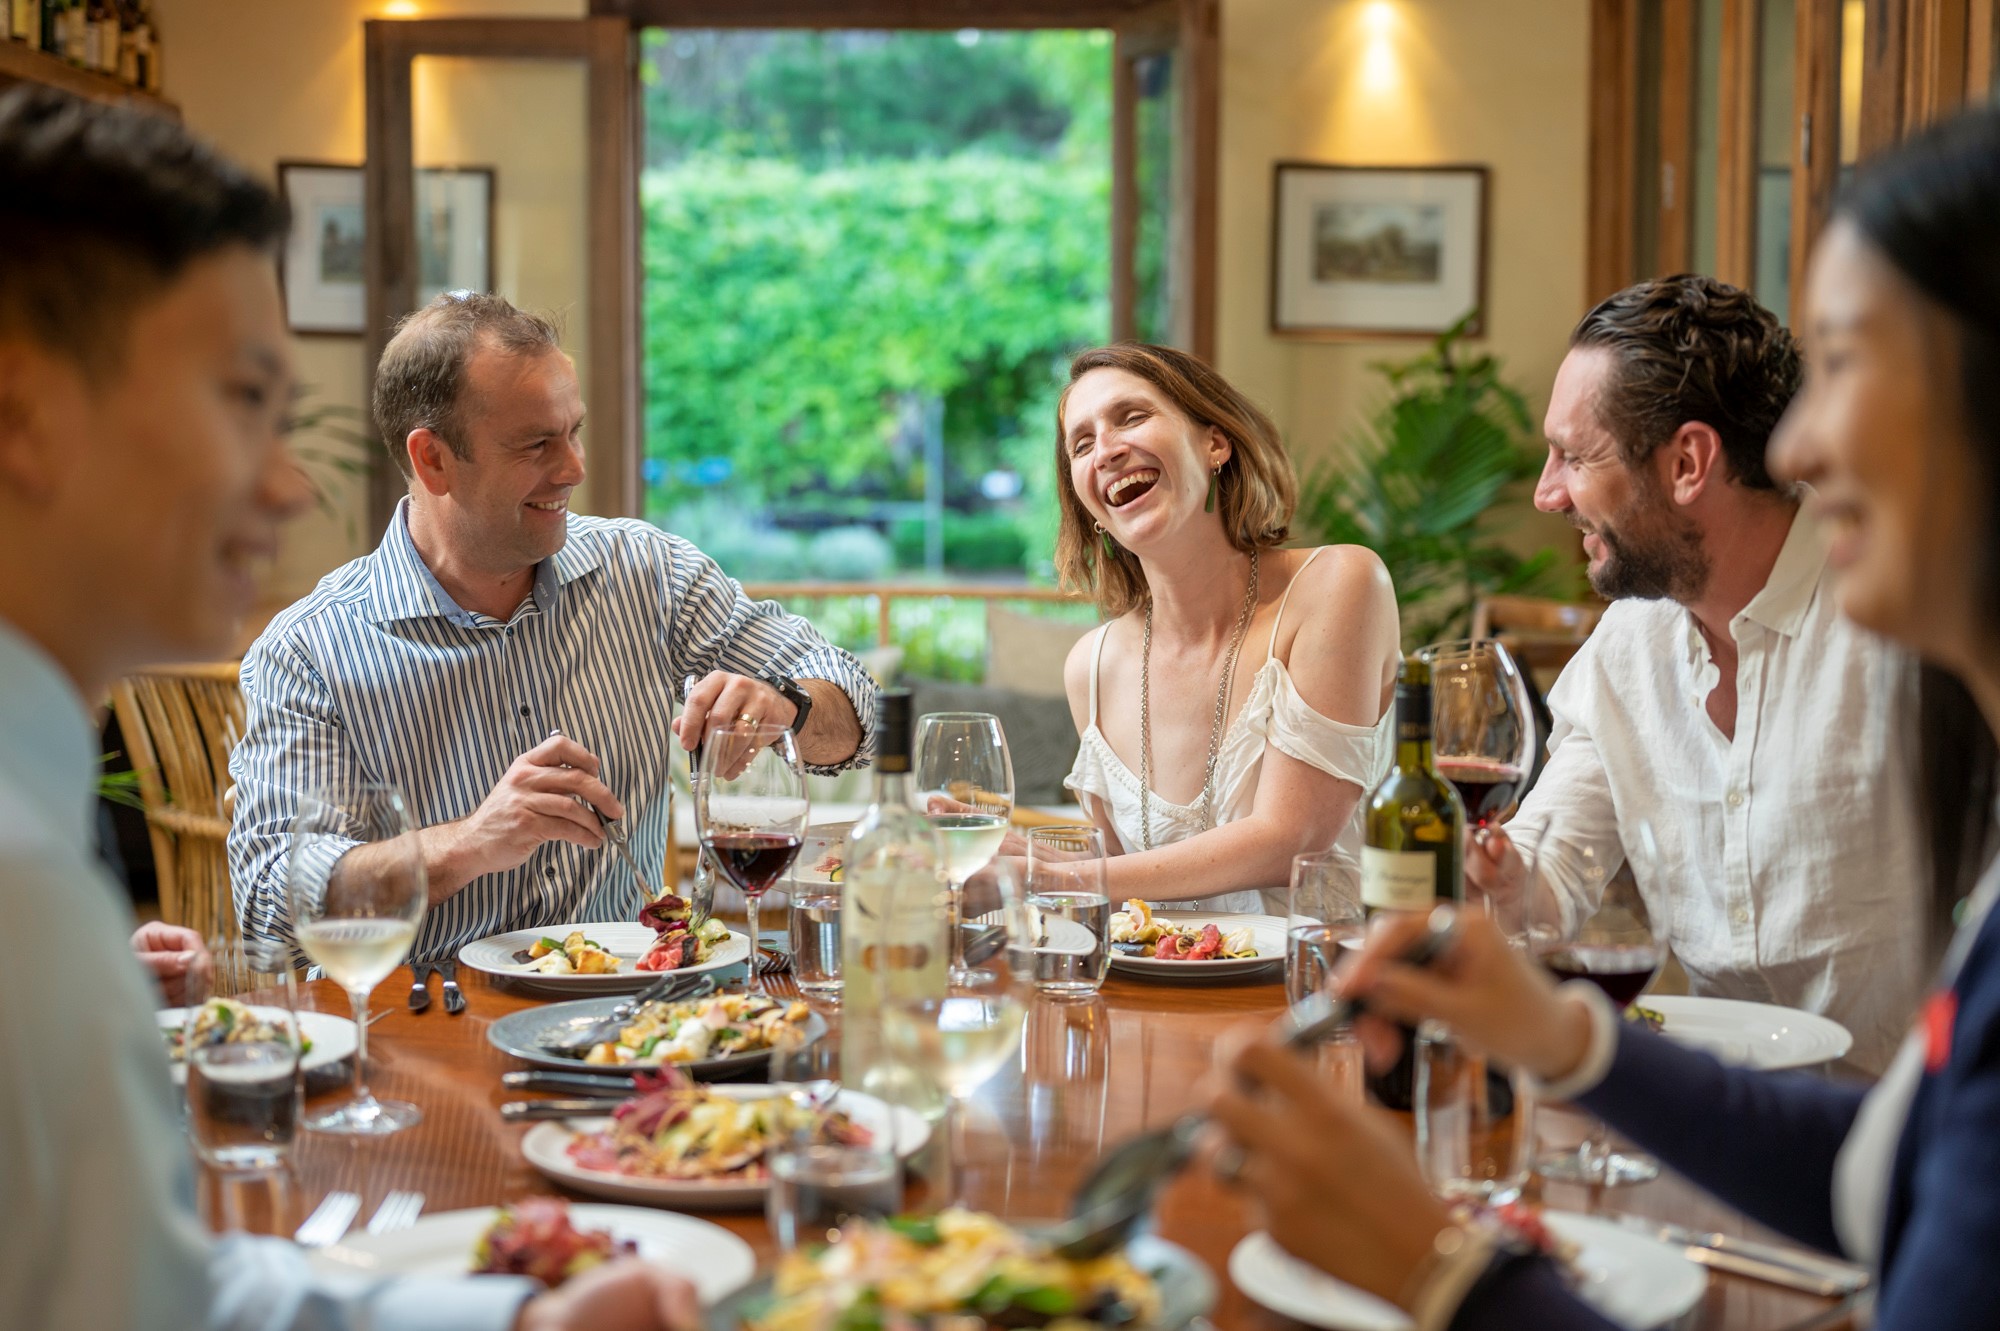 Save extra 10% OFF on McLaren Vale Private Dining Experience. From $295/pp